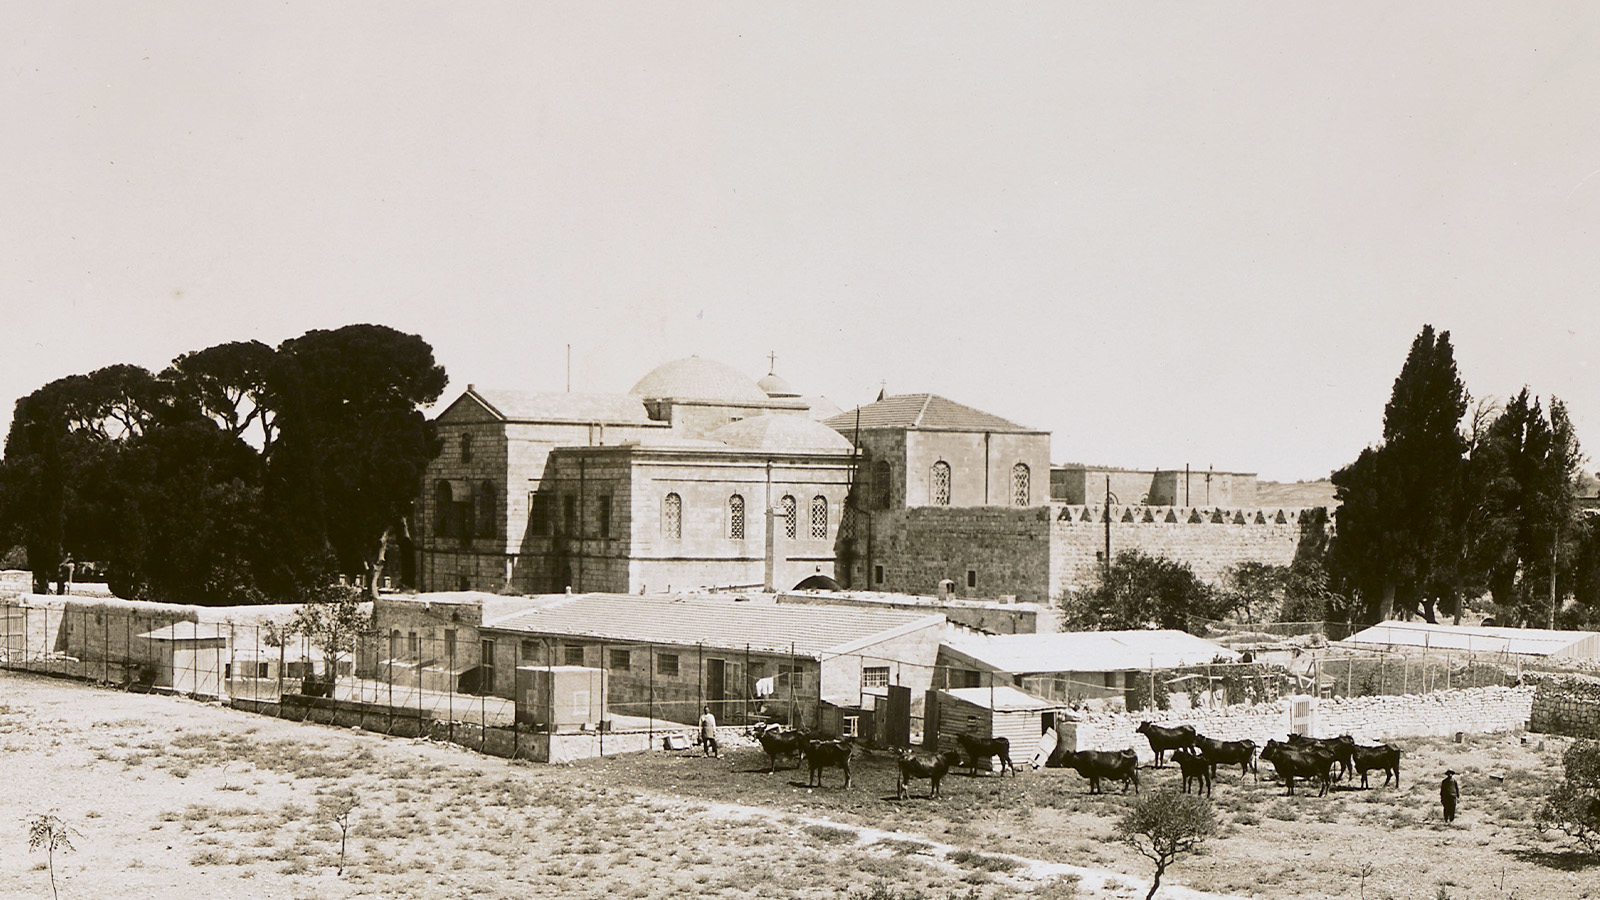 View of the complex of the Armenian Patriarchate of Jerusalem. Album of photographs of Armenian religious sites – Jerusalem and Bethlehem. Gulbenkian Archives I04-011.